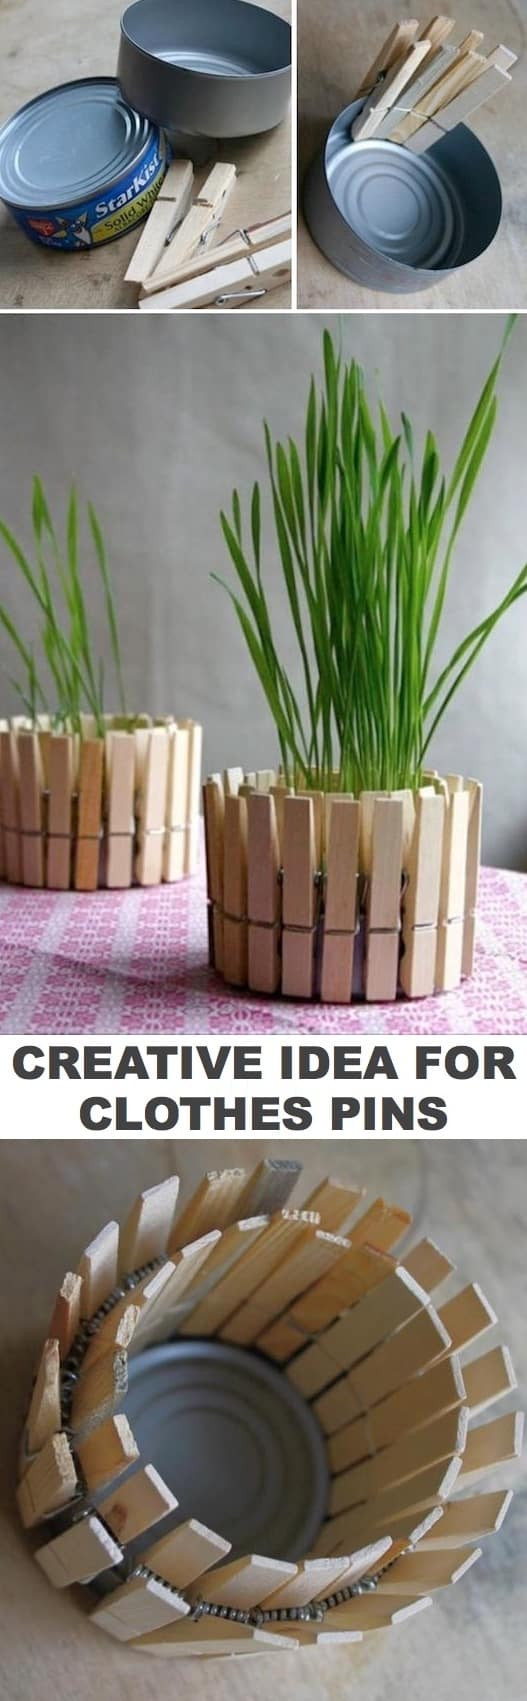 Activity Ideas For Adults
 Easy DIY Craft Ideas That Will Spark Your Creativity for